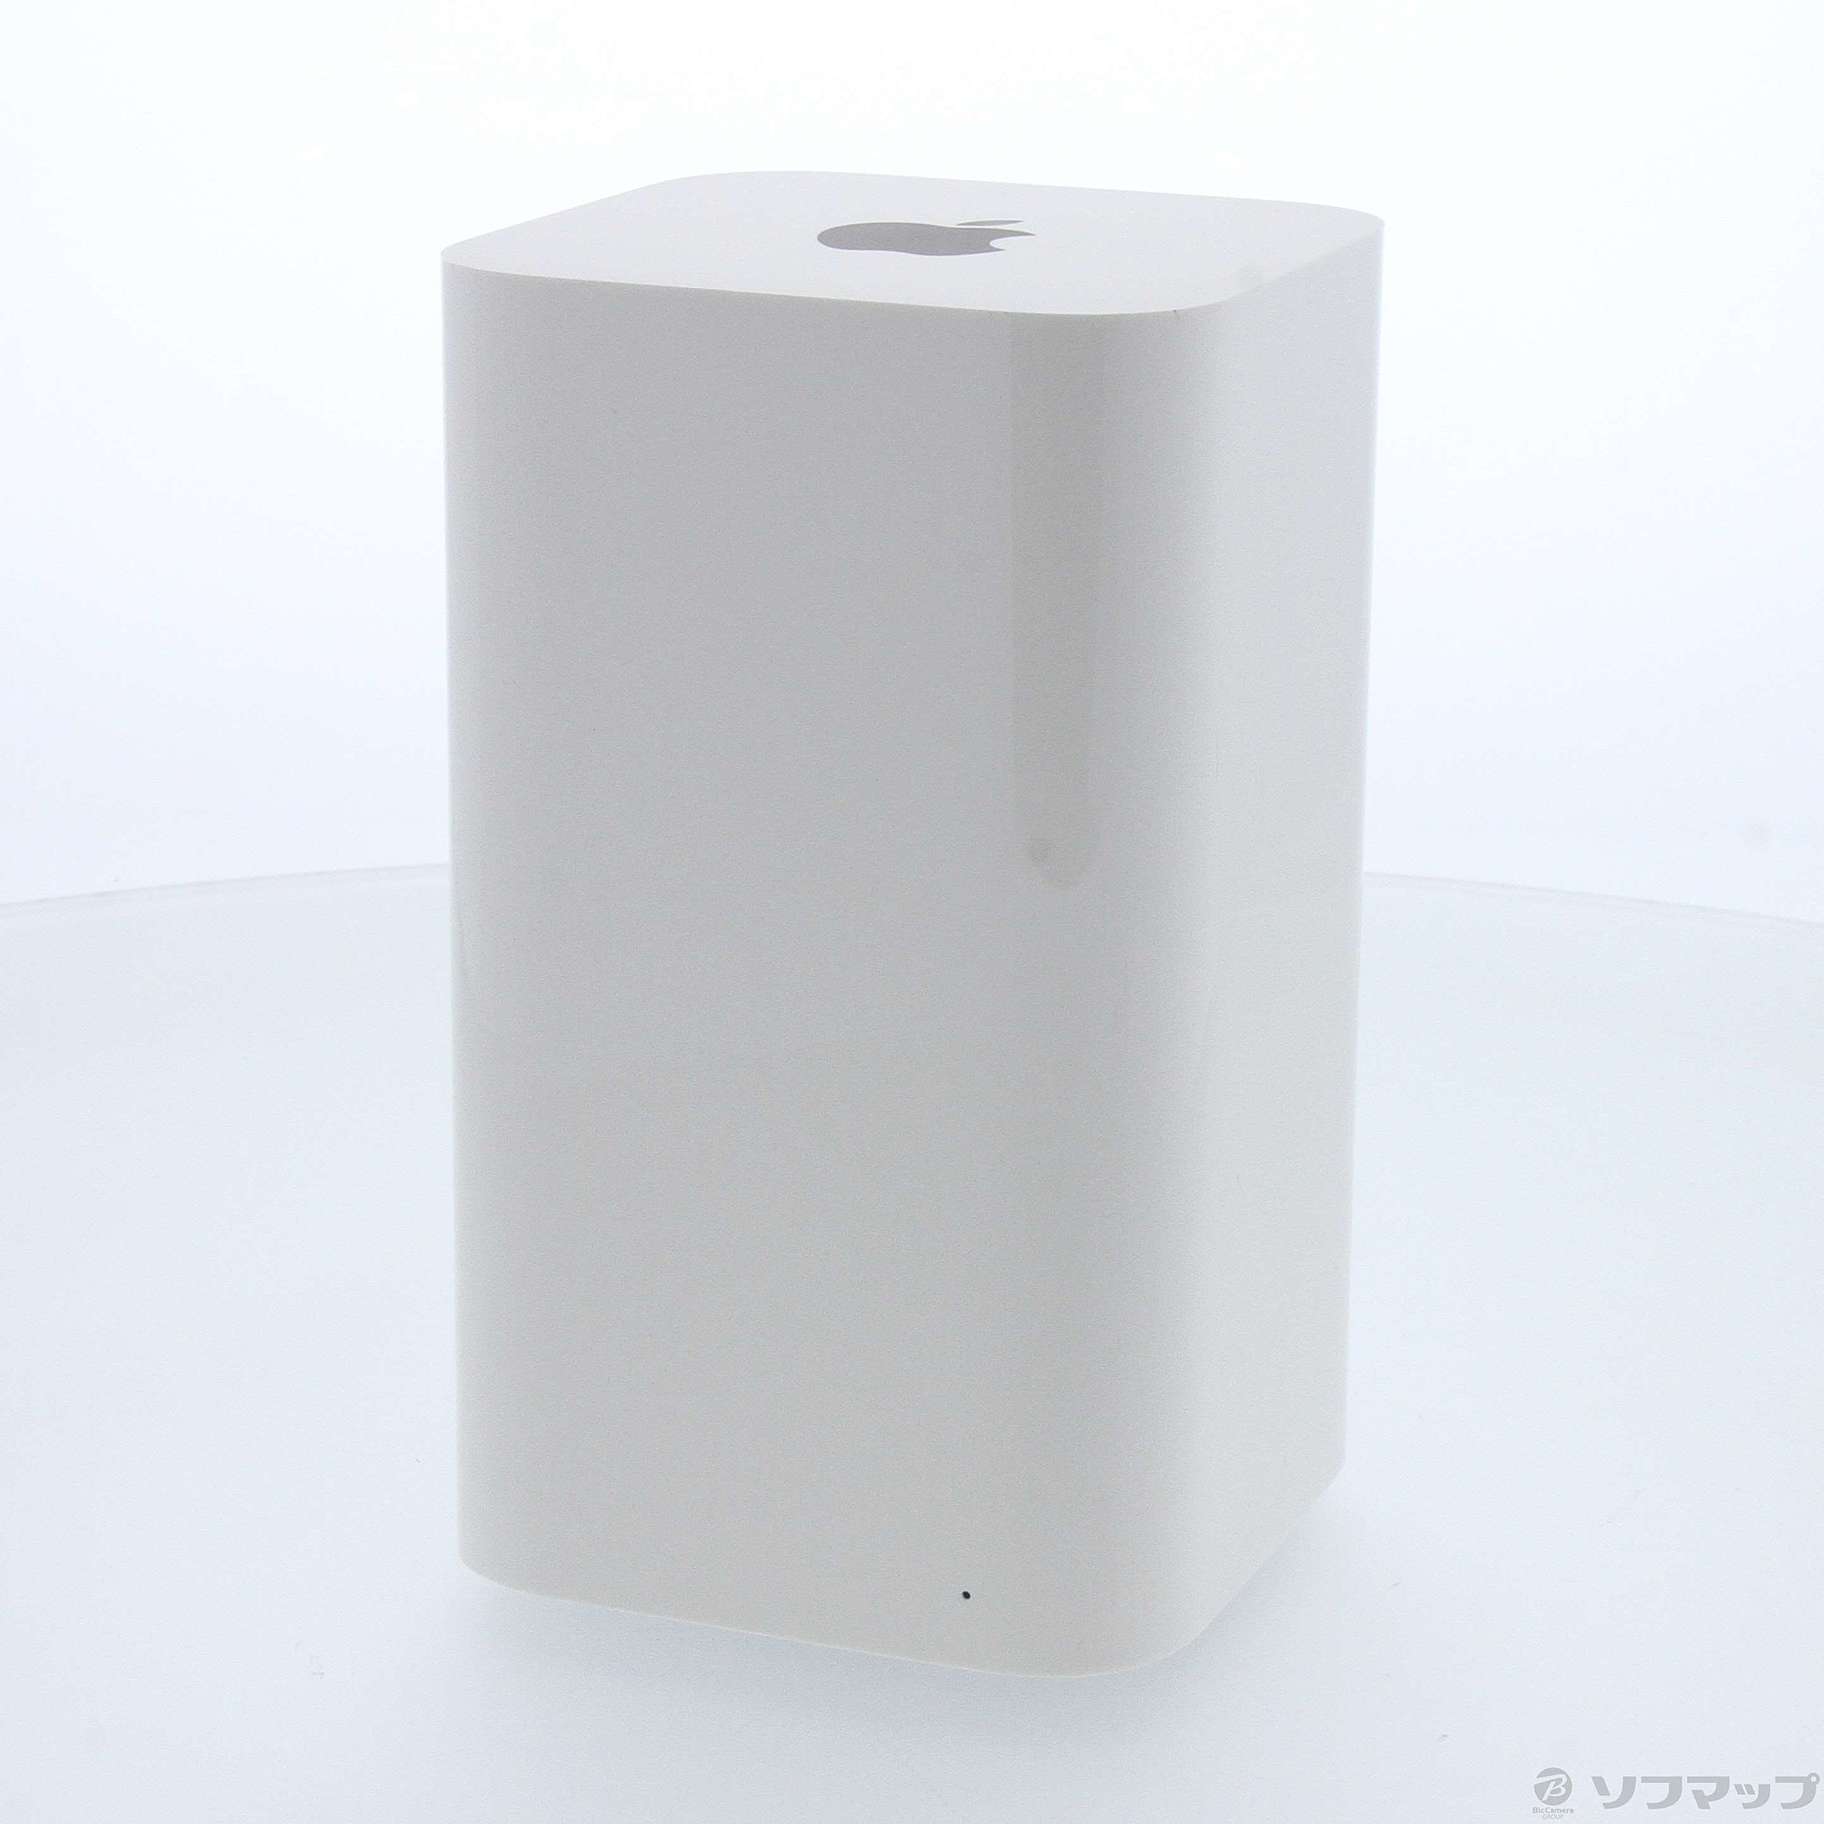 Apple AirMac Time Capsule 3TB（第5世代） - PC/タブレット